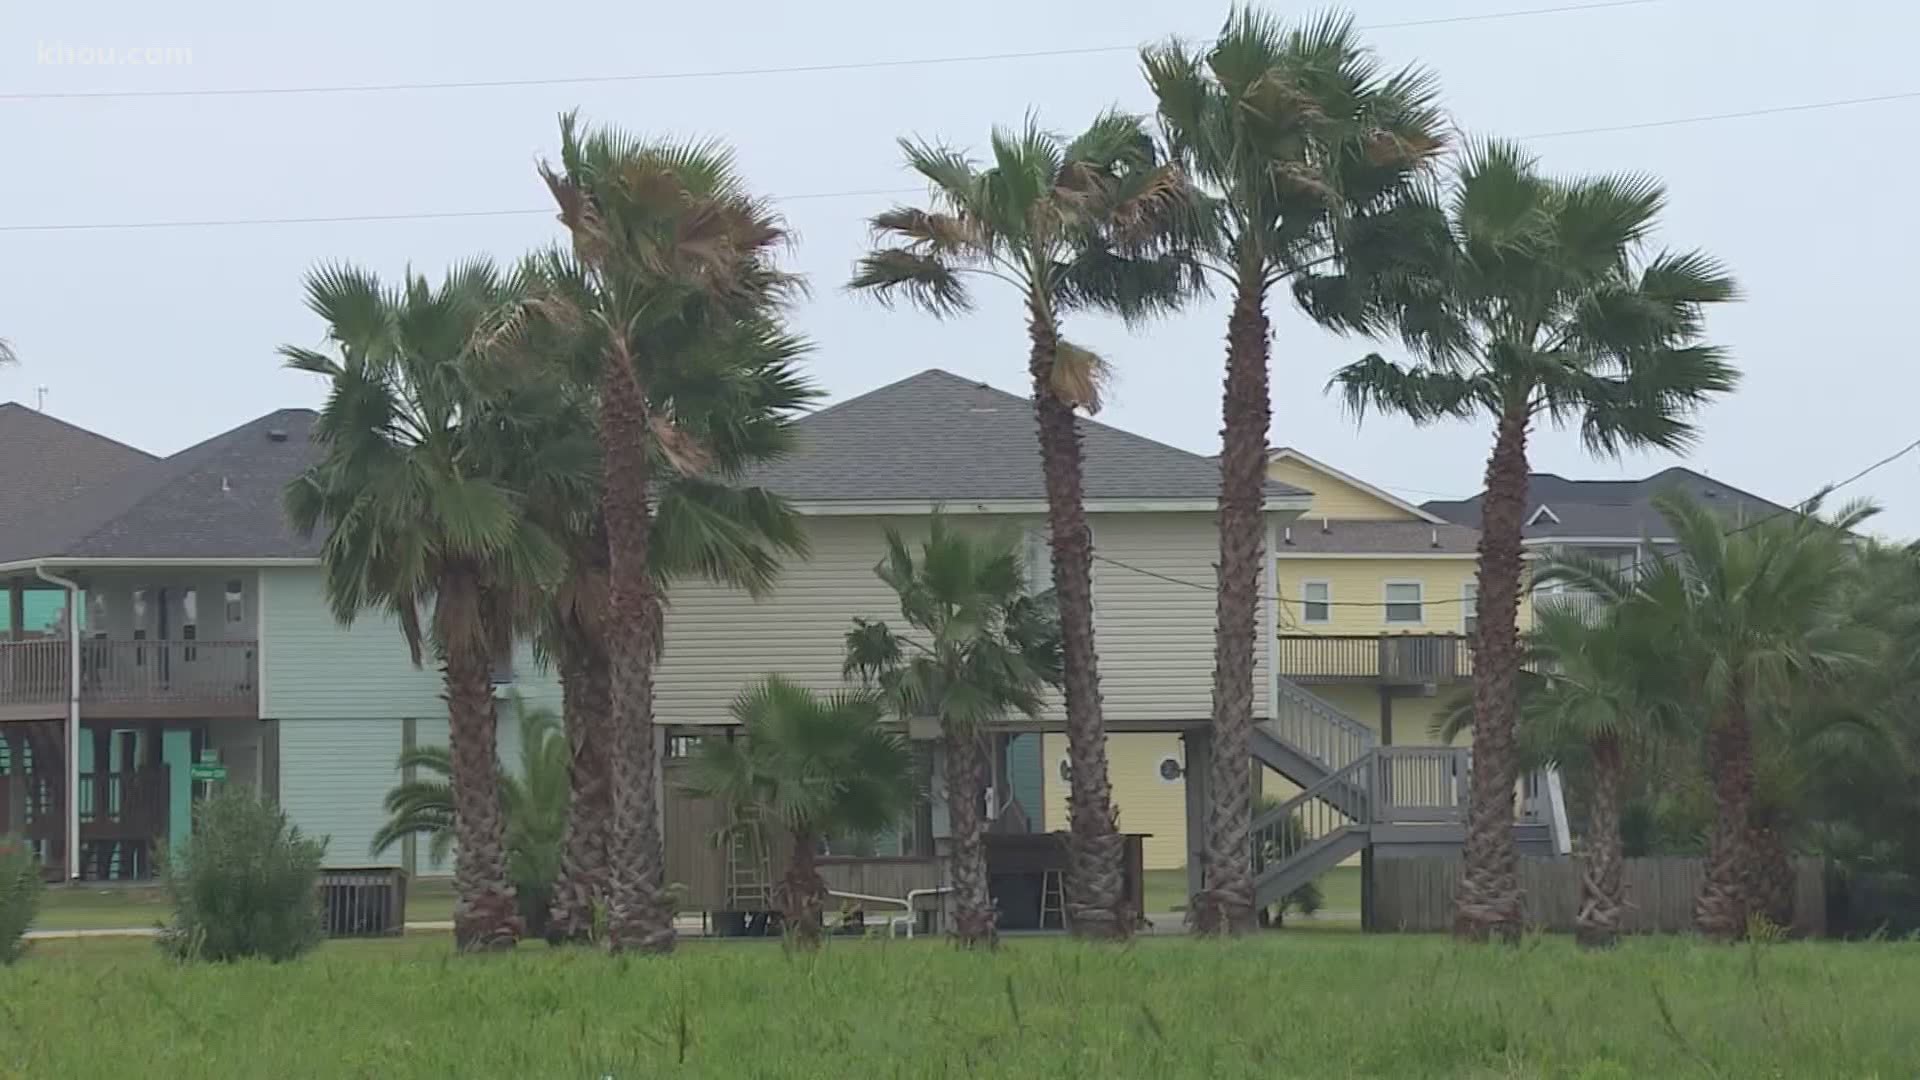 The Galveston County Judge is optimistic that Hurricane Delta won't cause serious damage to the area, but he's warning residents to be prepared.